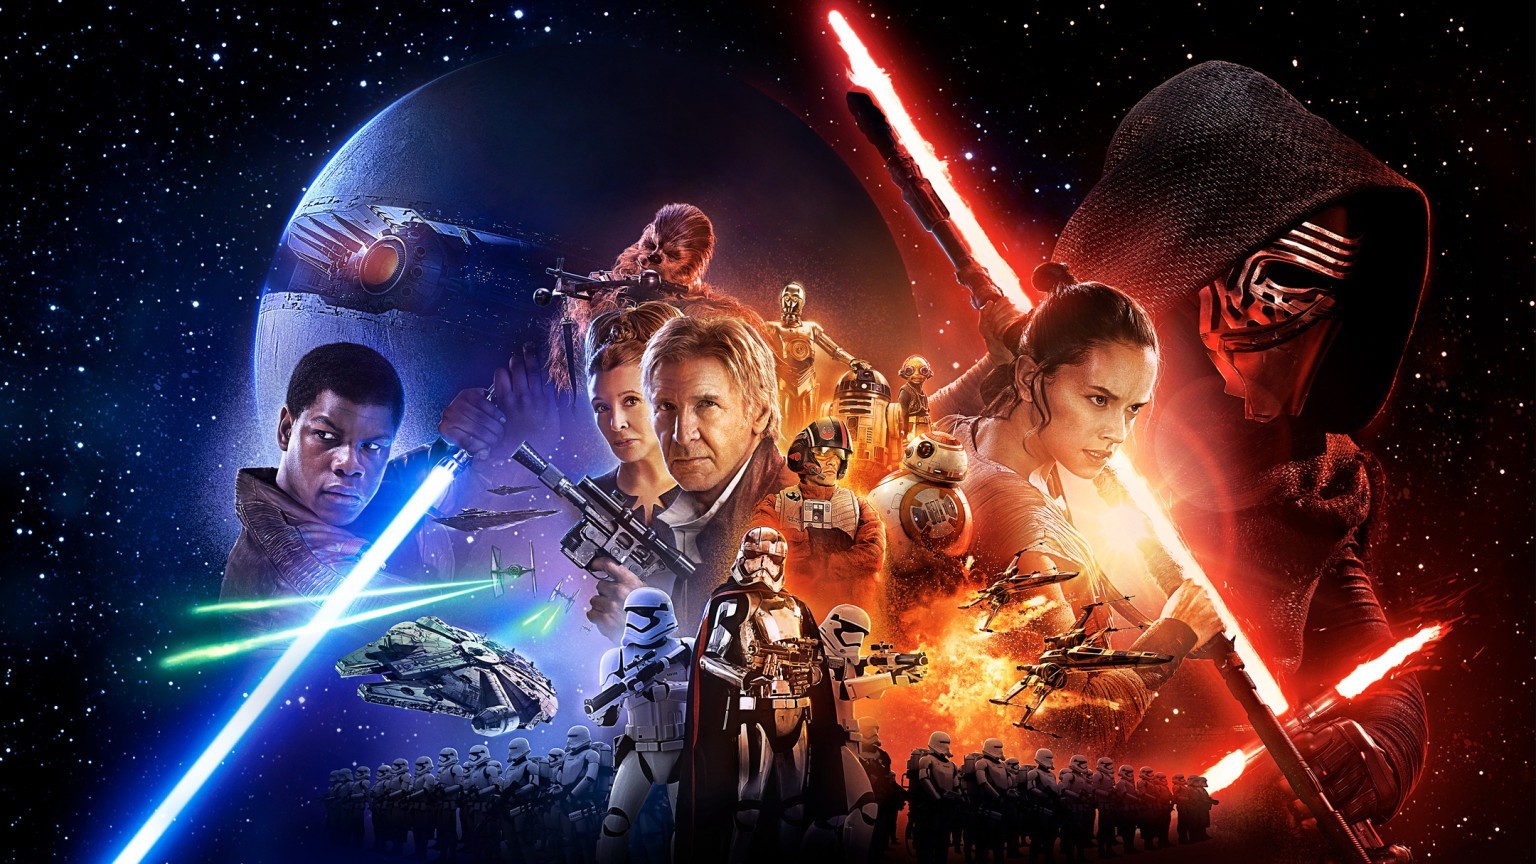 Star Wars Ep. VII: The Force Awakens for ipod download